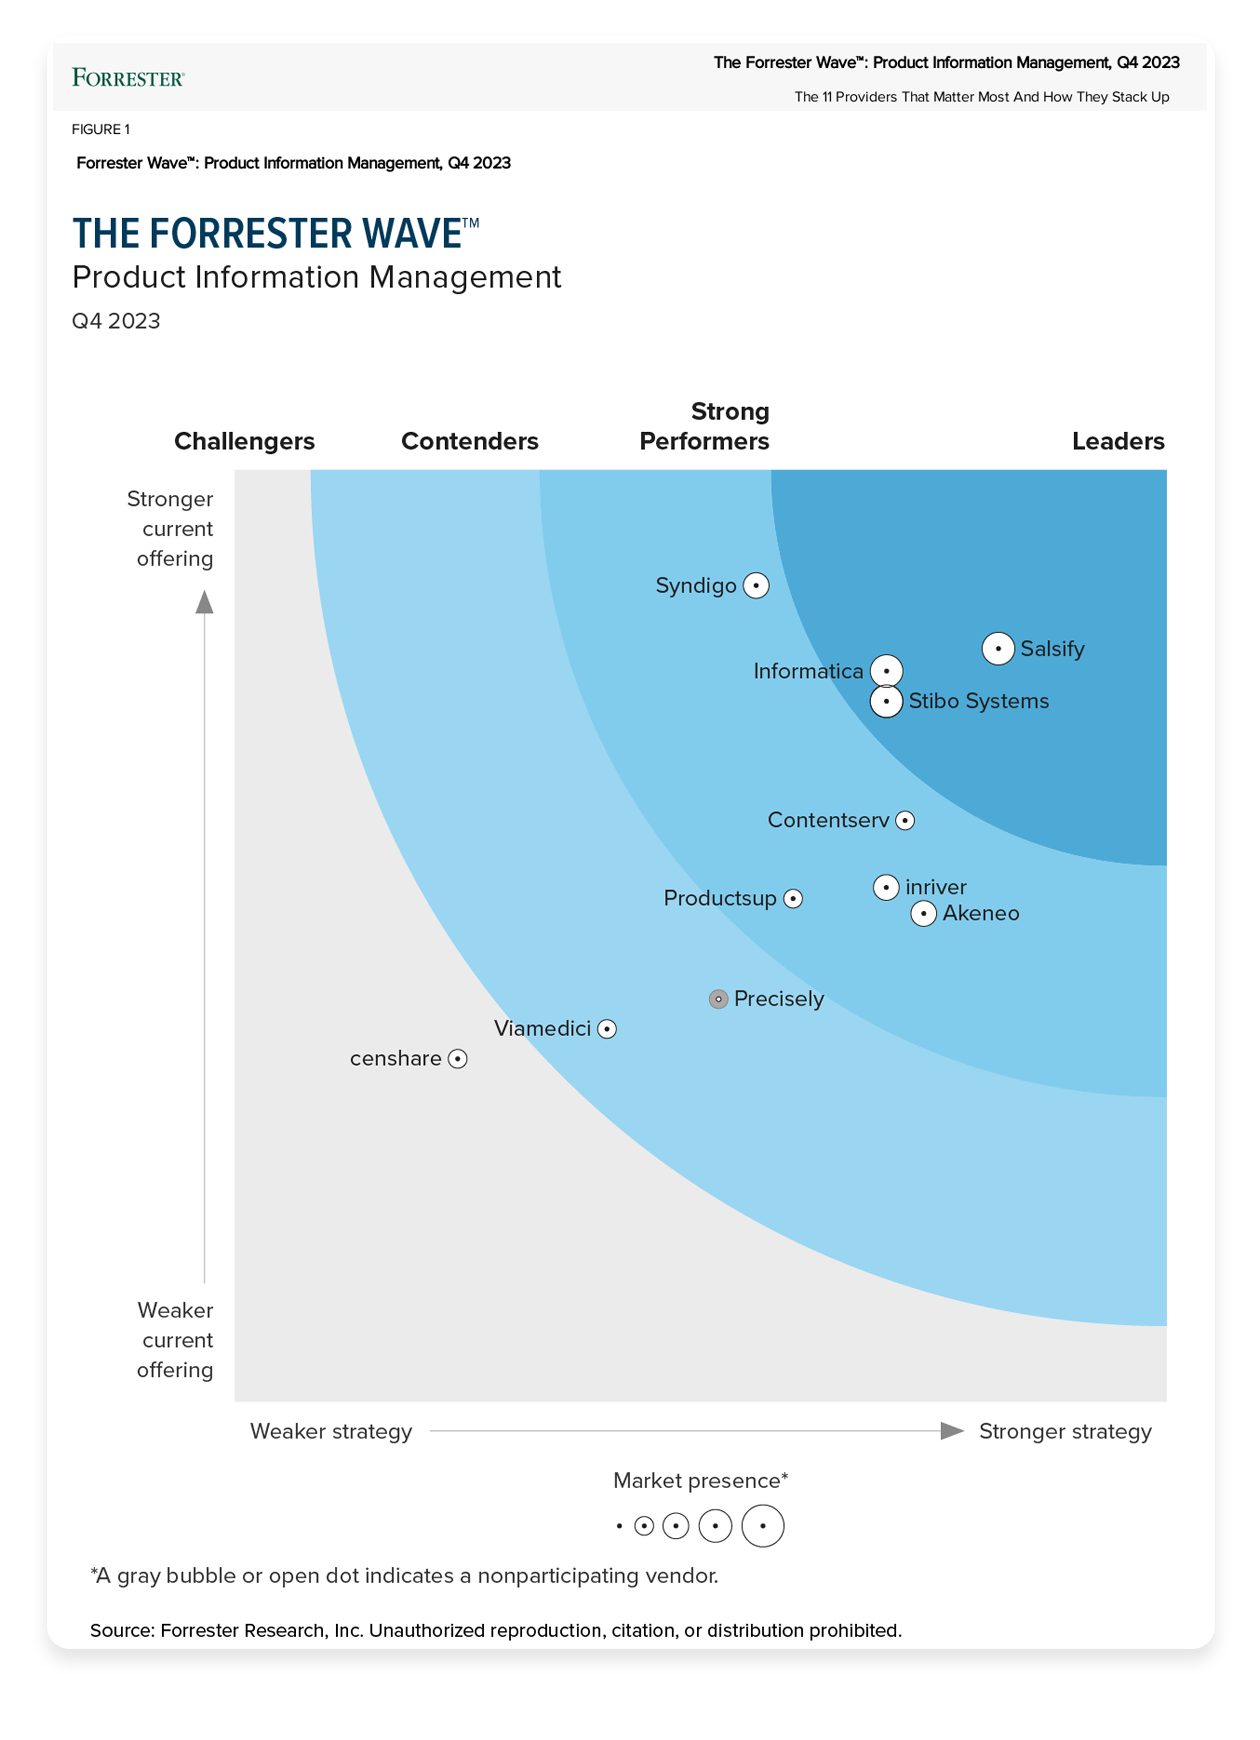 Salsify Named a Leader in The Forrester Wave Product Information Management Q4 2023 Report Graphic